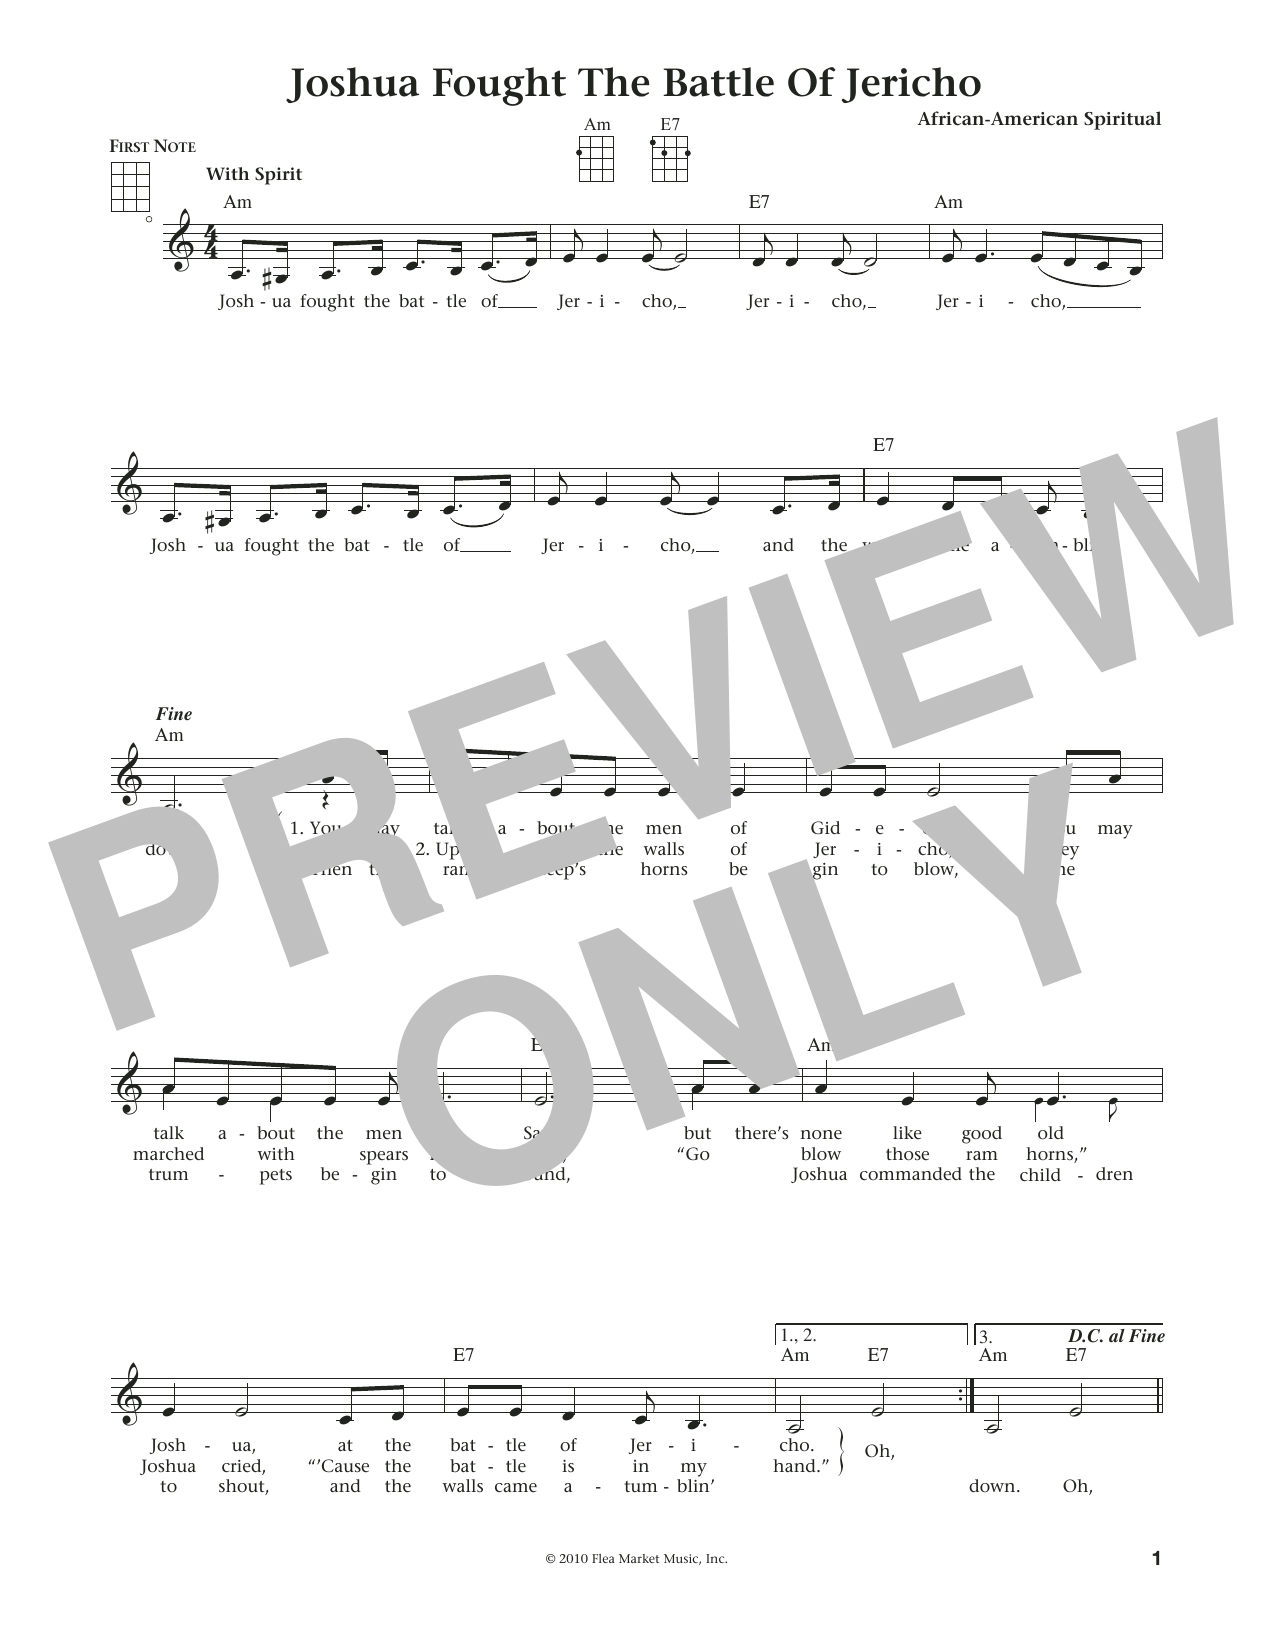 Download African-American Spiritual Joshua (Fit The Battle Of Jericho) (fro Sheet Music